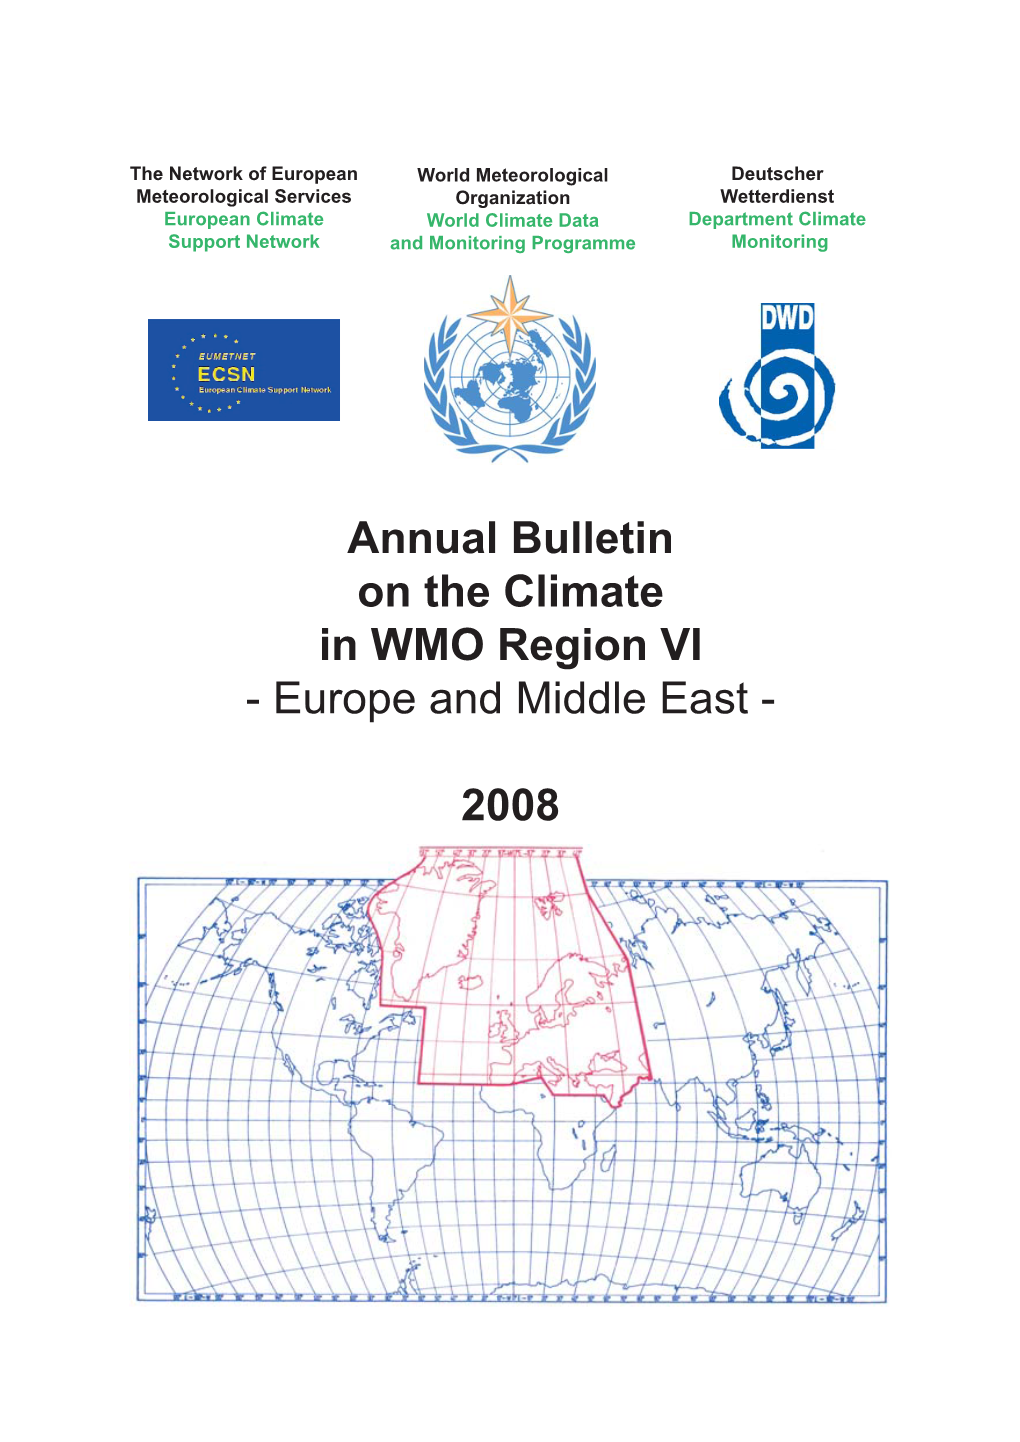 Annual Bulletin on the Climate in WMO Region VI - Europe and Middle East